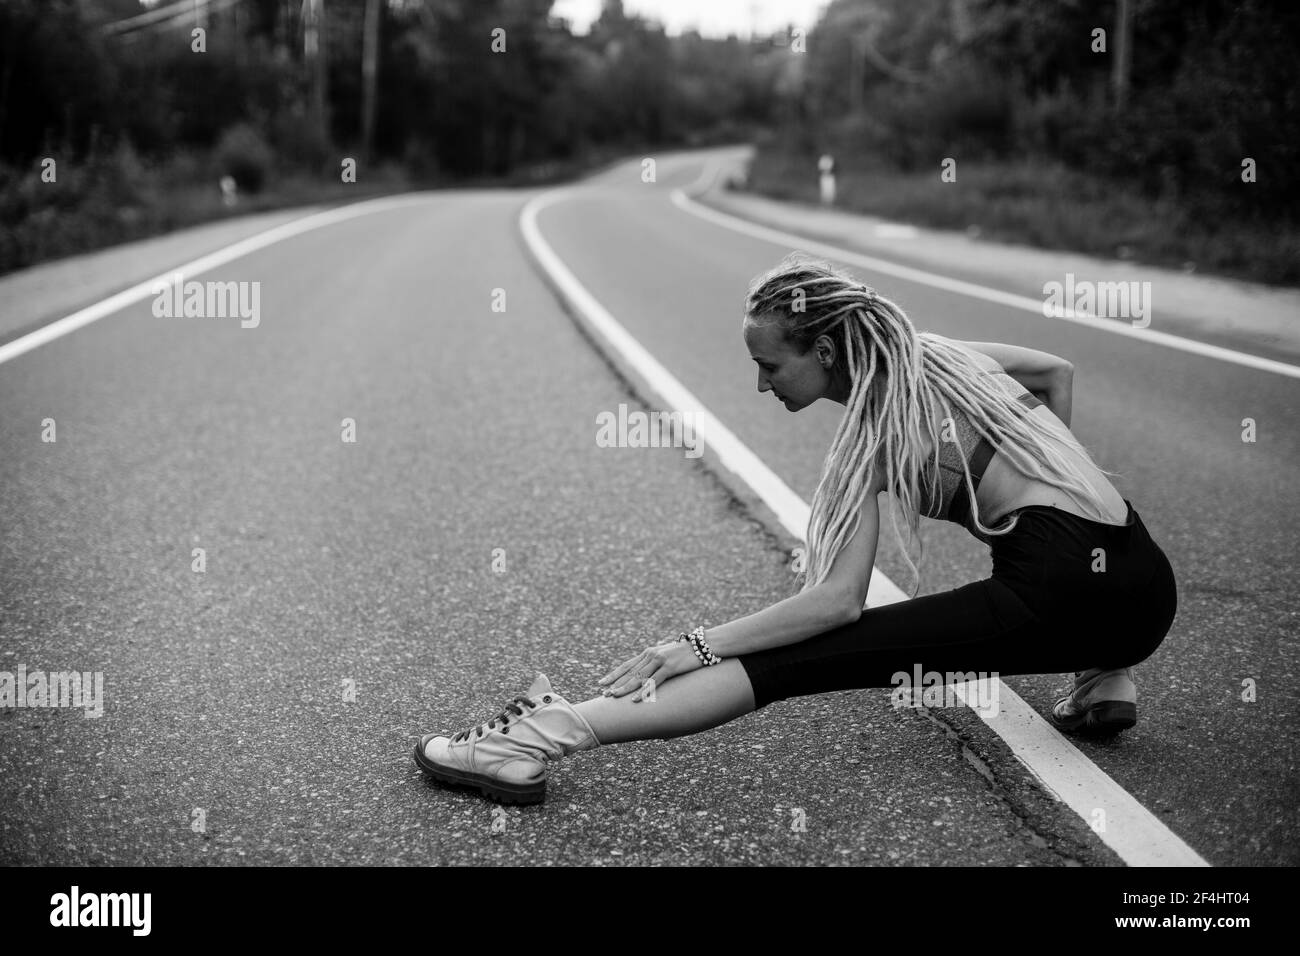 Runnung woman warm-up before jogging. Black and white photo. Stock Photo